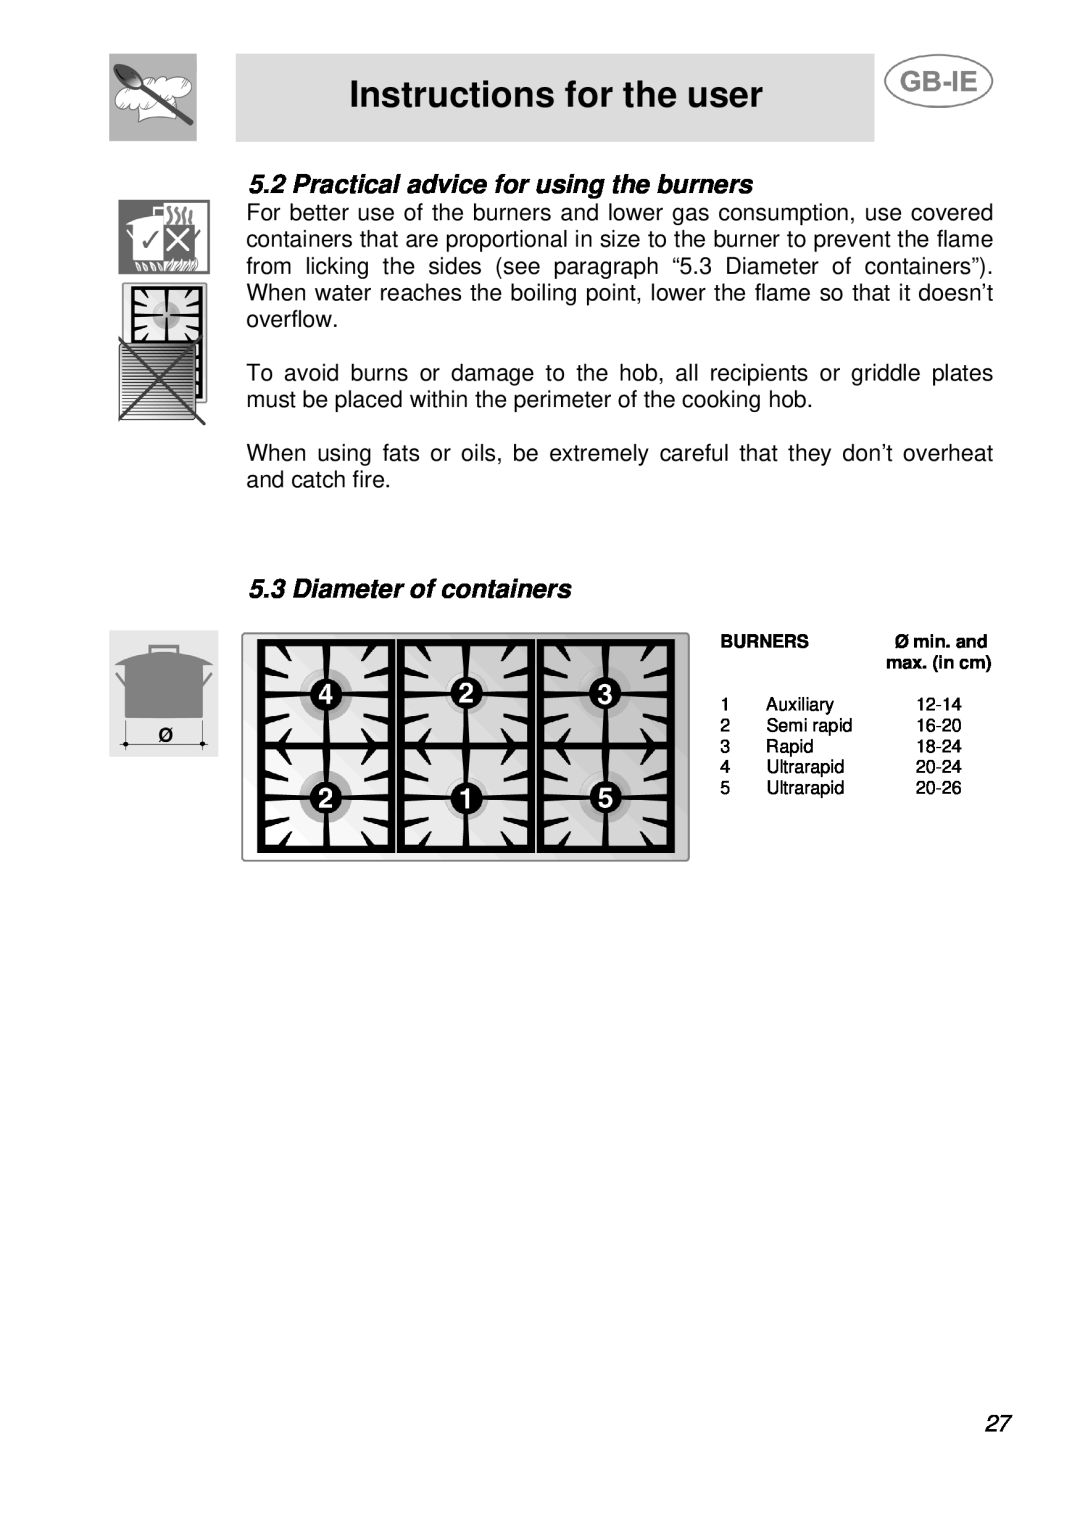 Smeg AS21T76F manual Practical advice for using the burners, Diameter of containers, Instructions for the user, Burners 